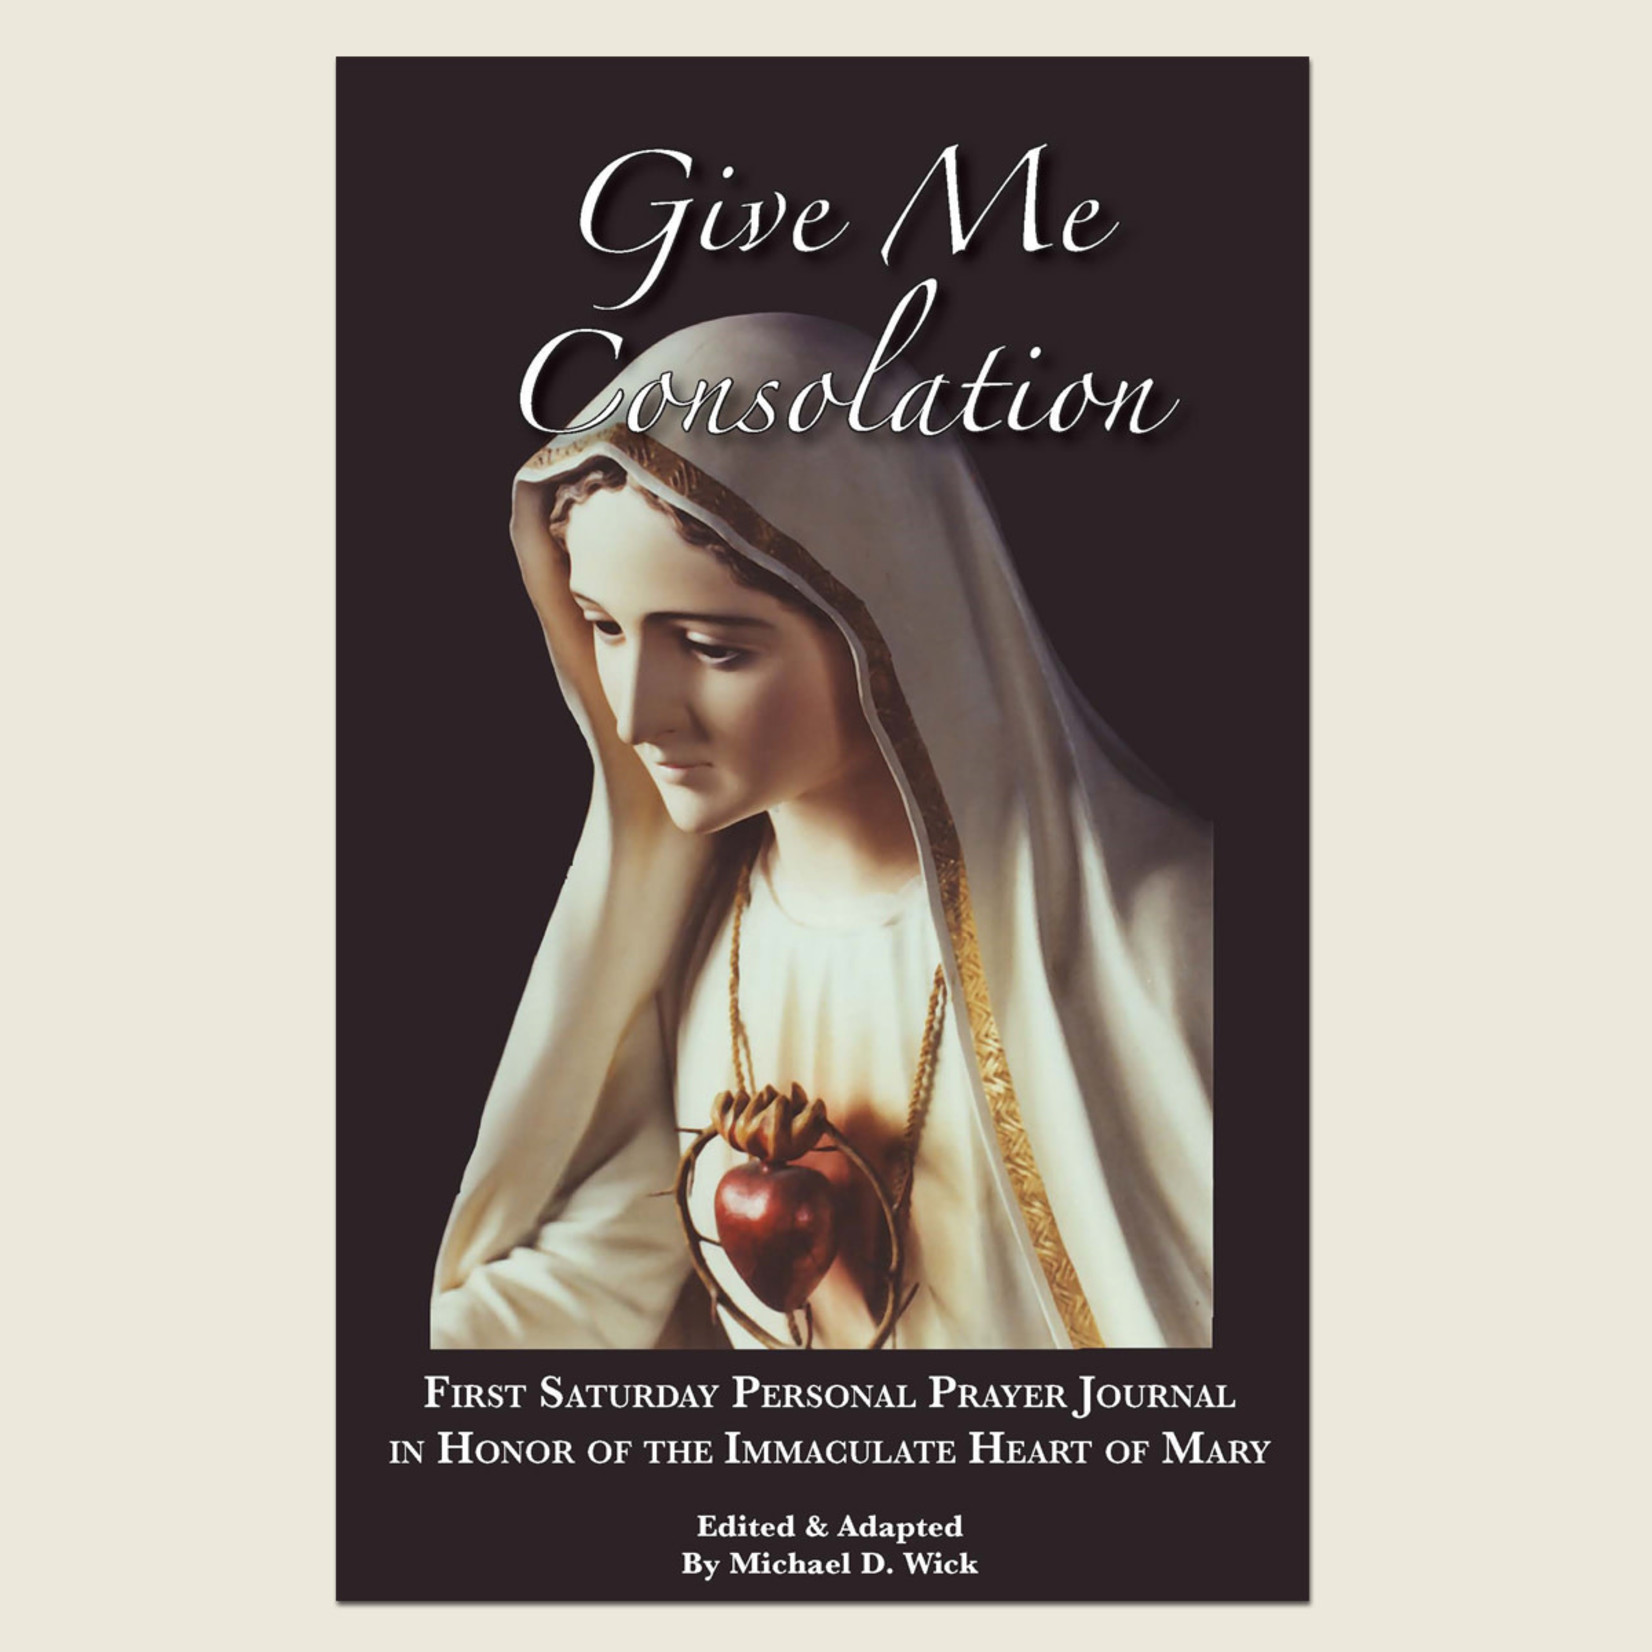 Give Me Consolation:  A First Saturday Personal Prayer Journal